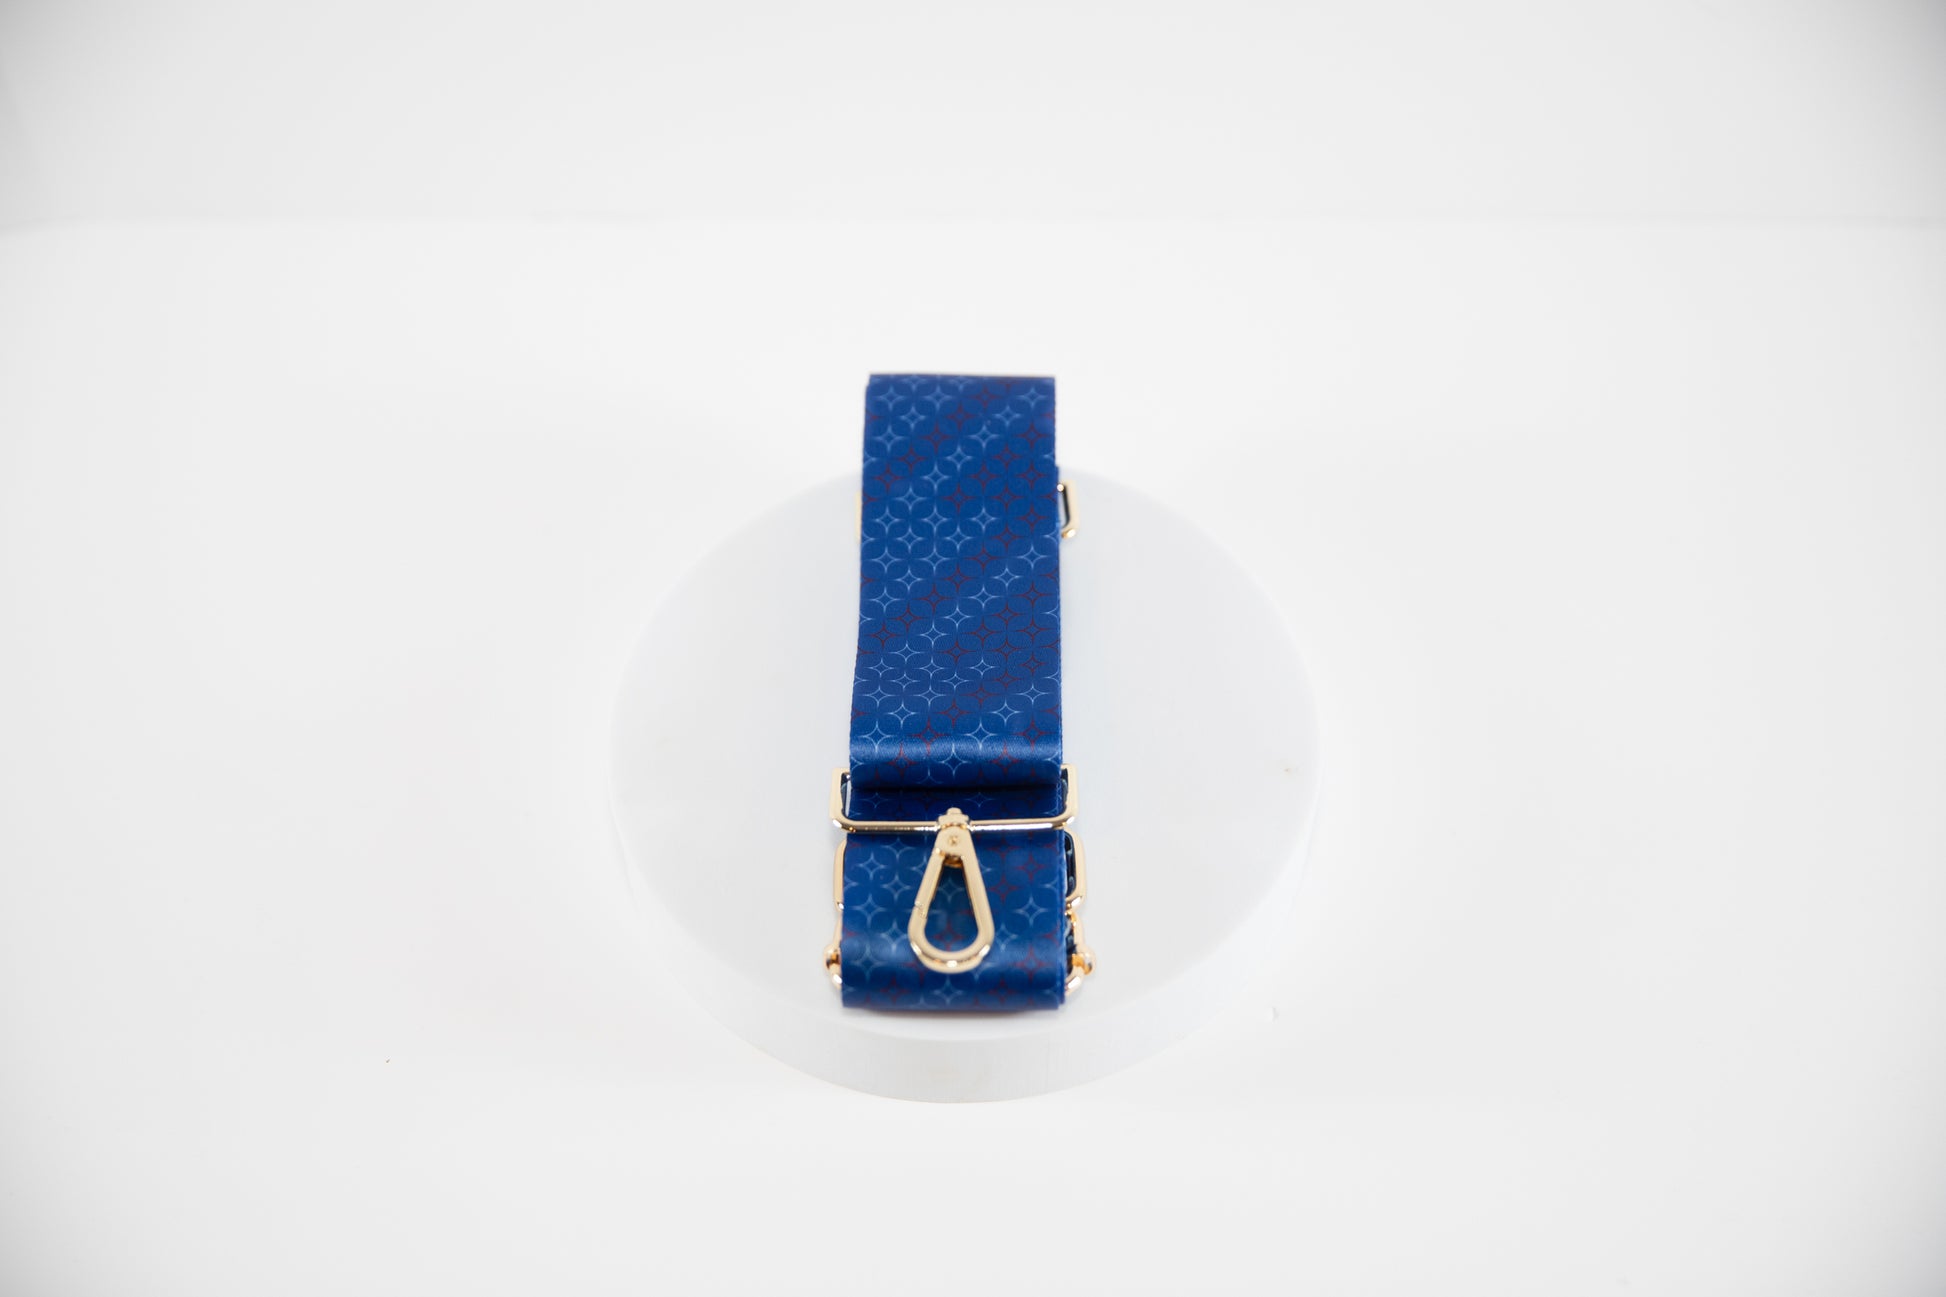 Elegant cross body strap shown in Texas Rangers team colors of red, white and blue.